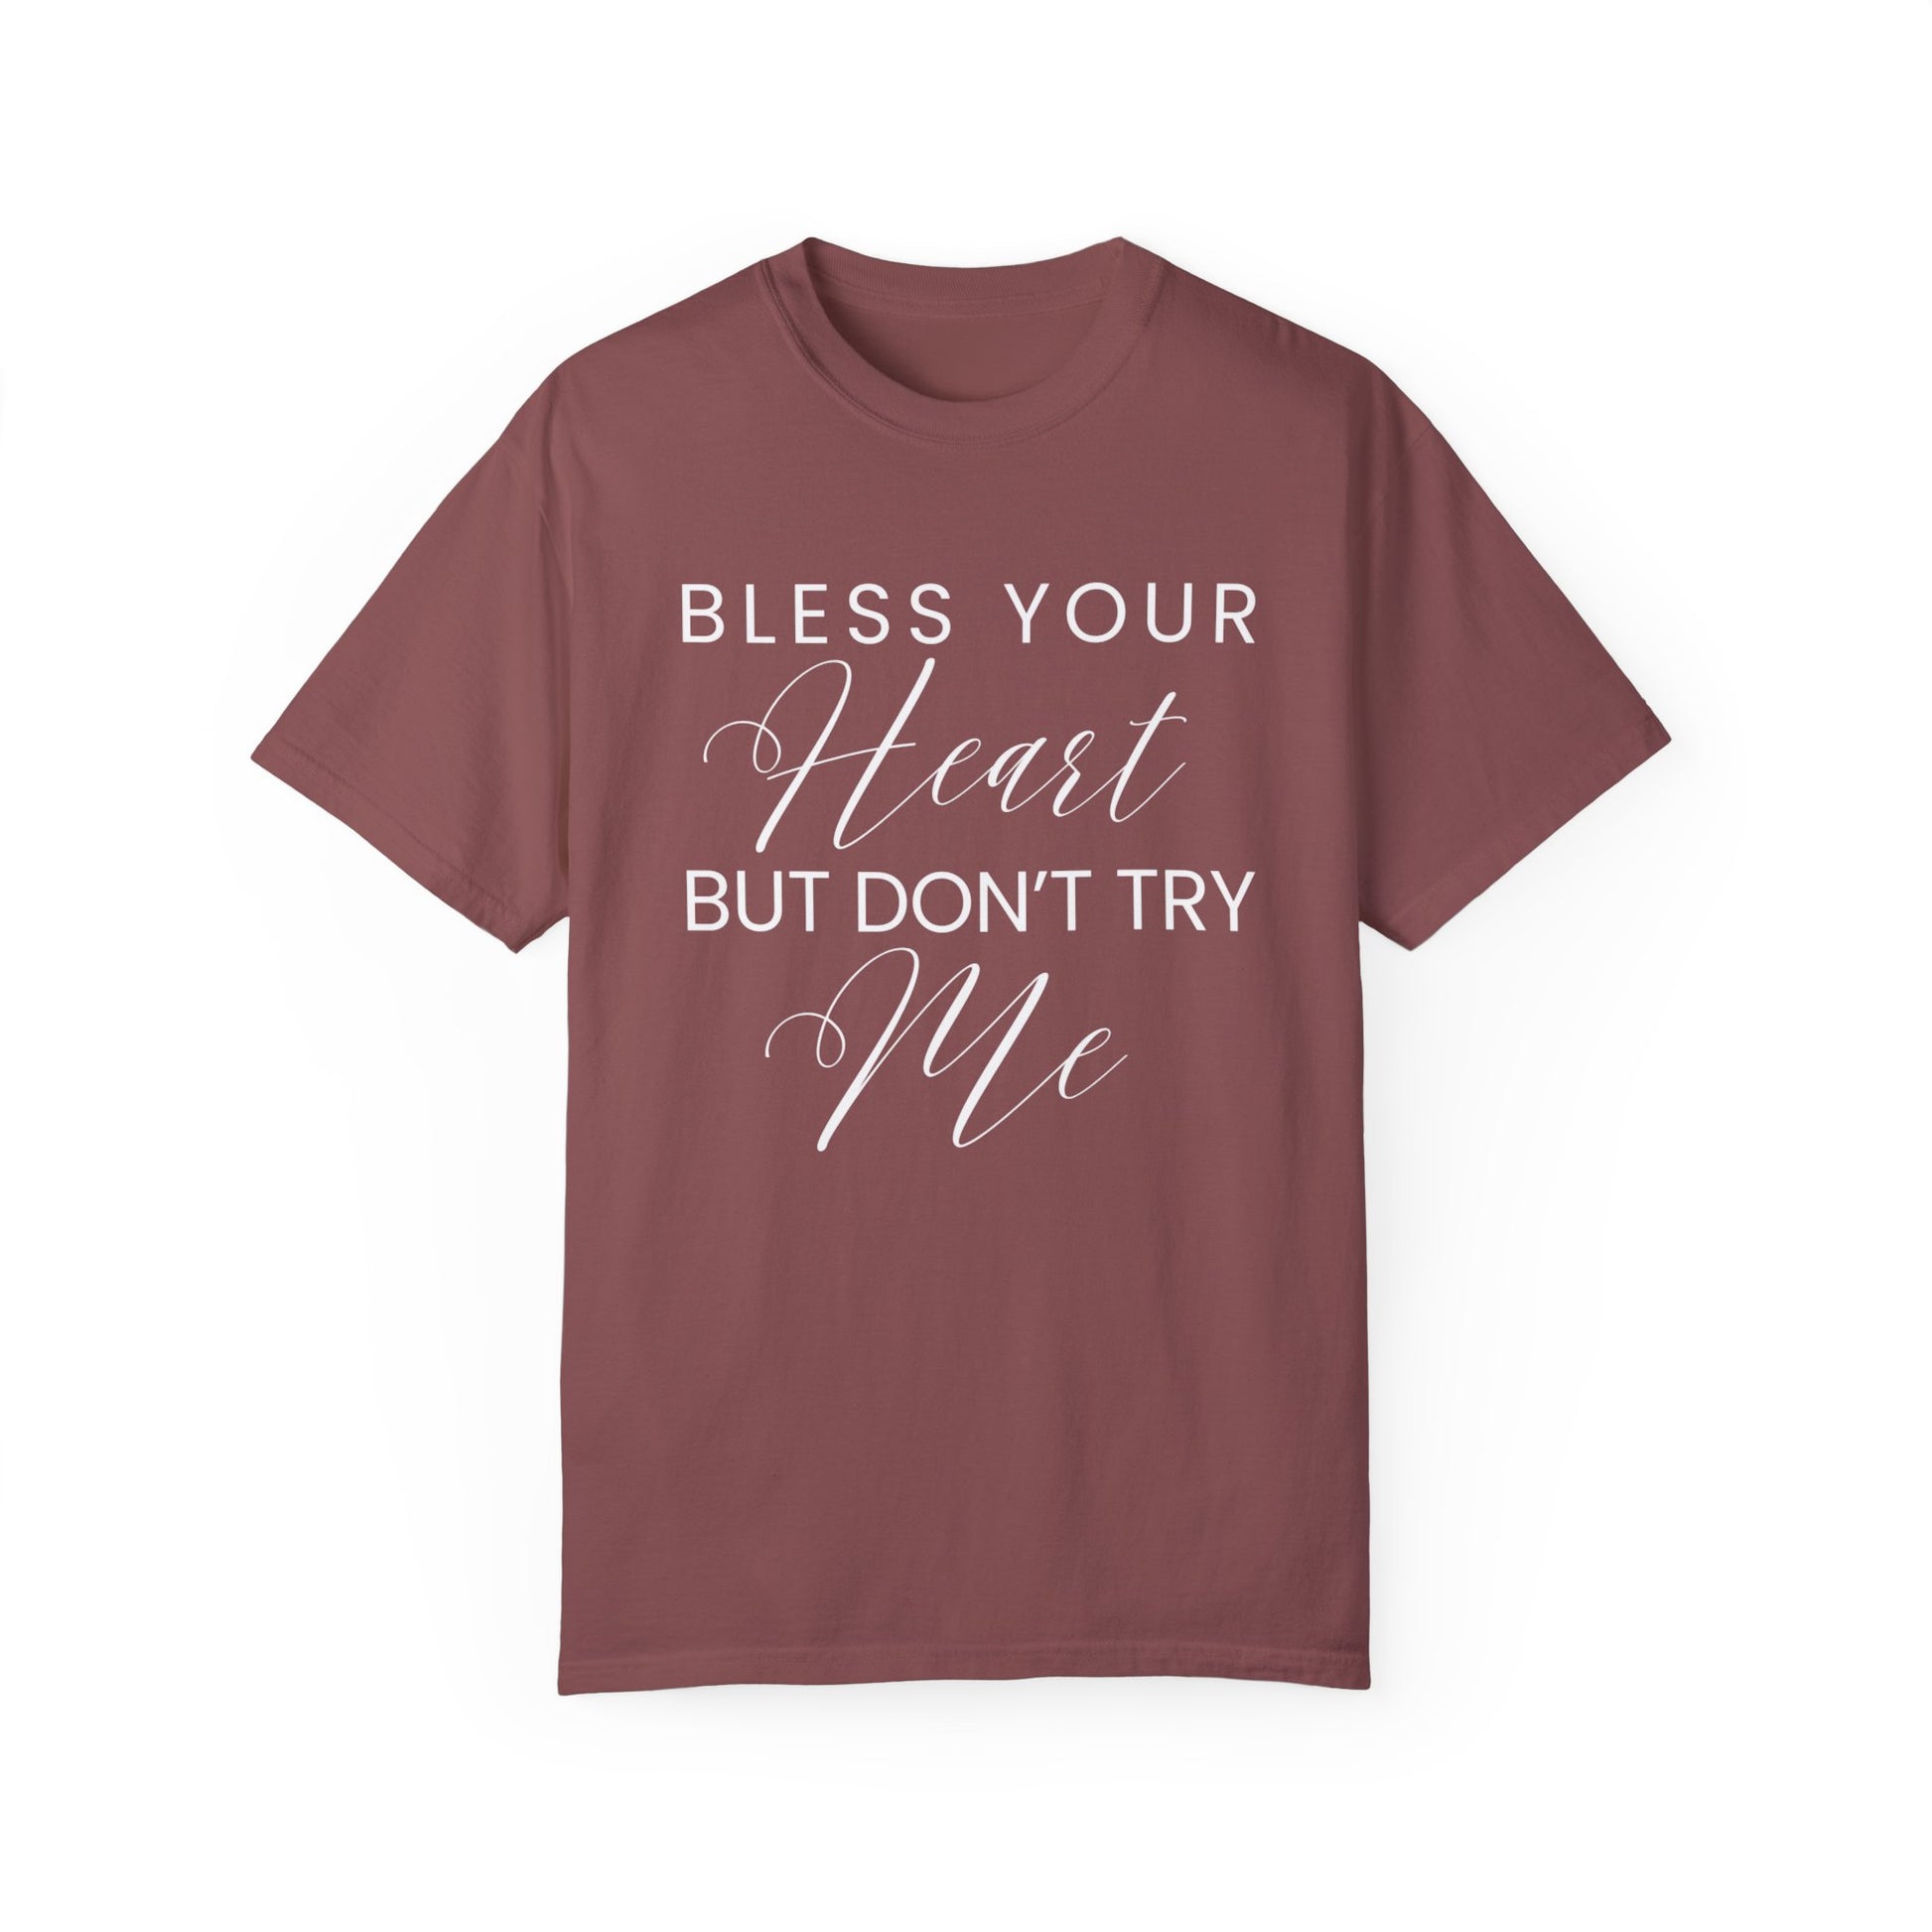 Bless Your Heart, But Don't Try Me - Women's Comfort Colors Shirt - Eddy and Rita